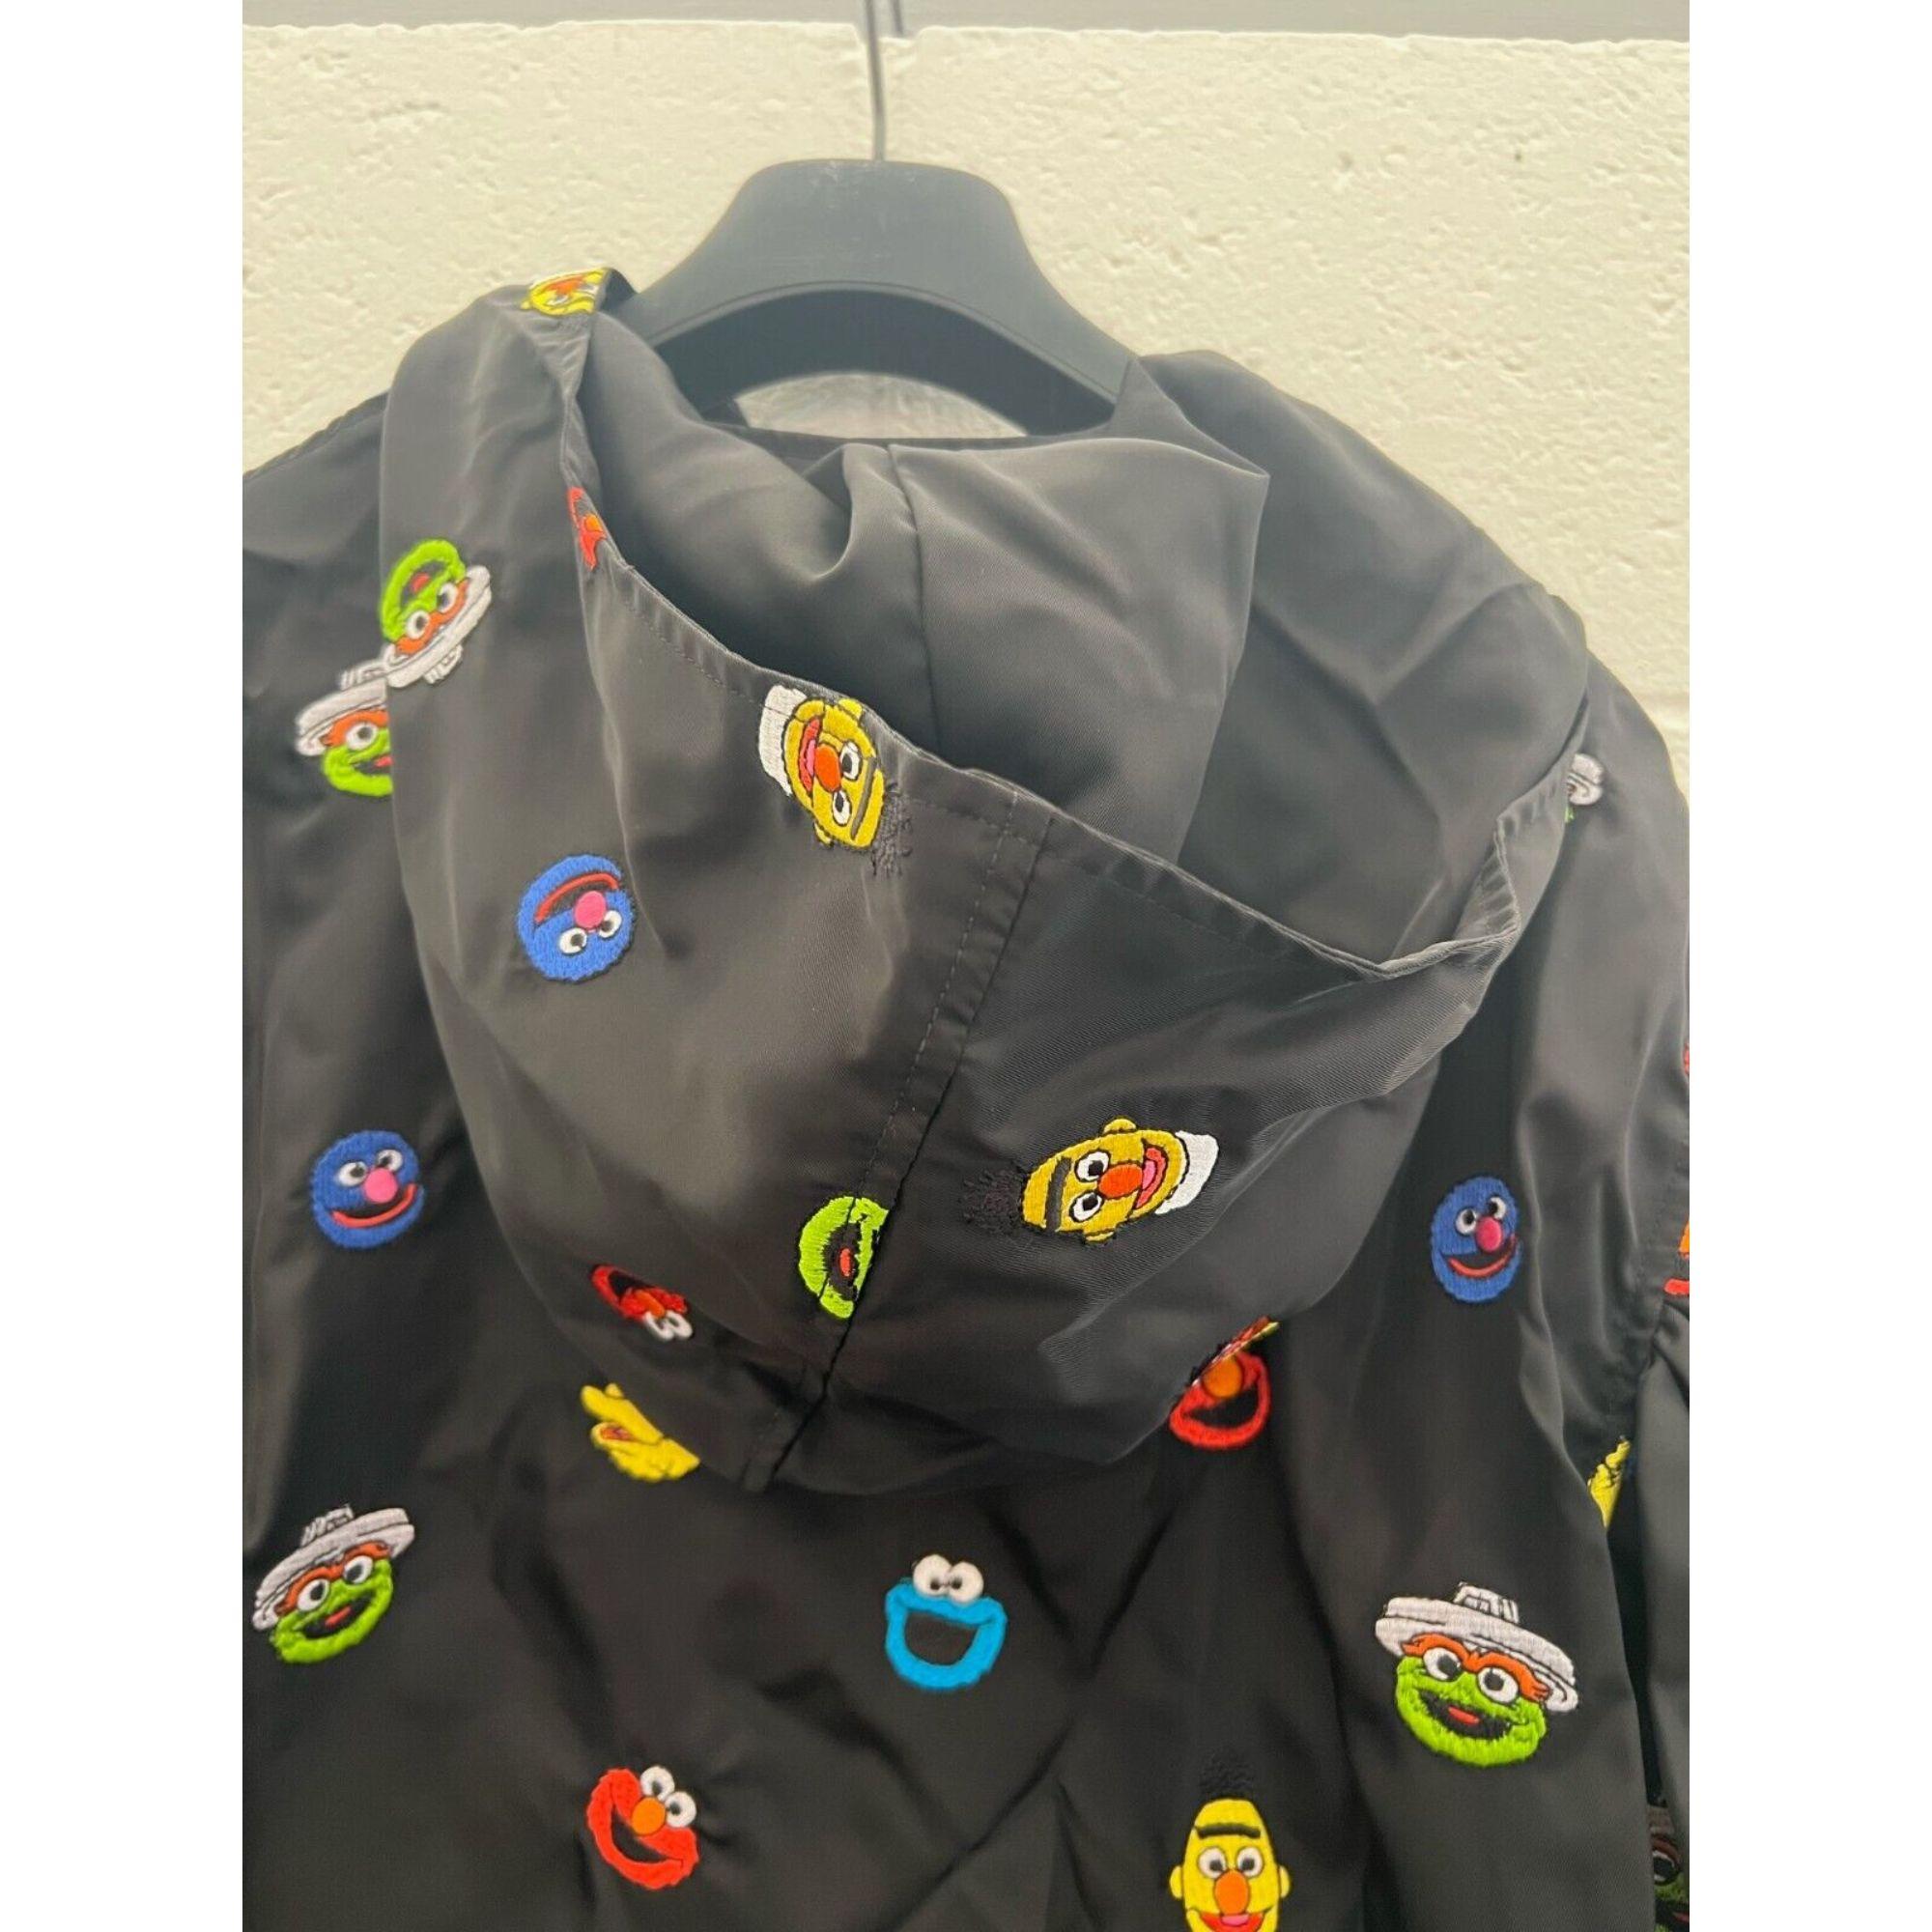 AW21 Moschino Couture Sesame Street Embroidered Hooded Jacket by Jeremy Scott For Sale 8